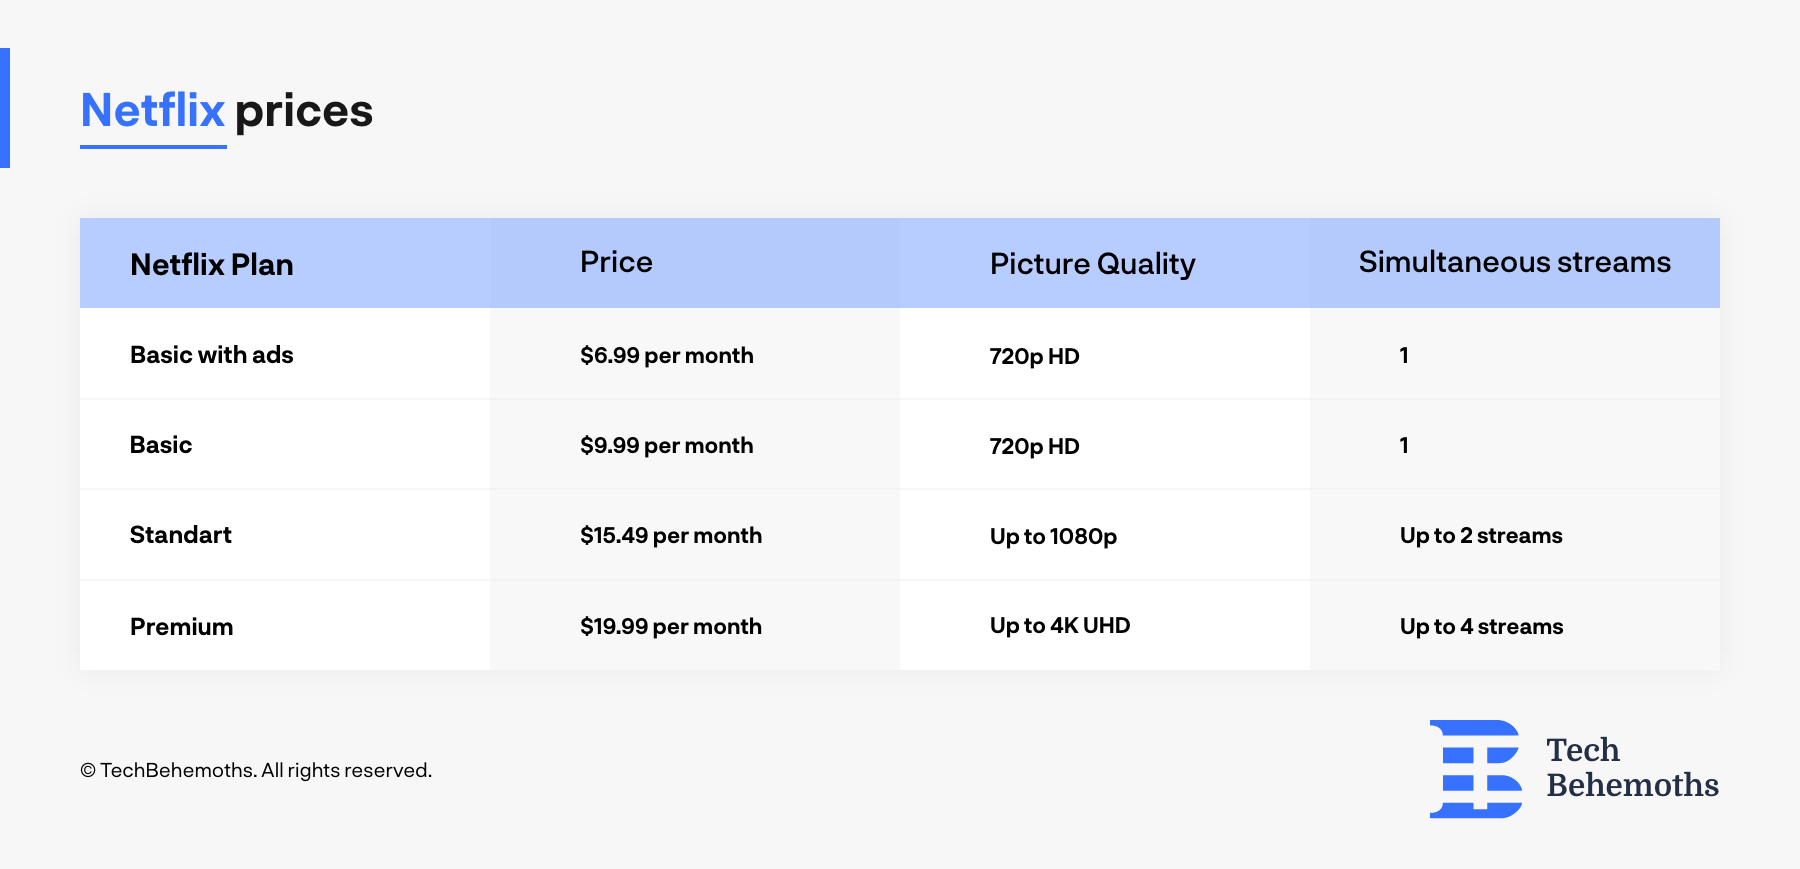 Netflix pricing options based on image quality, ads, and number of devices